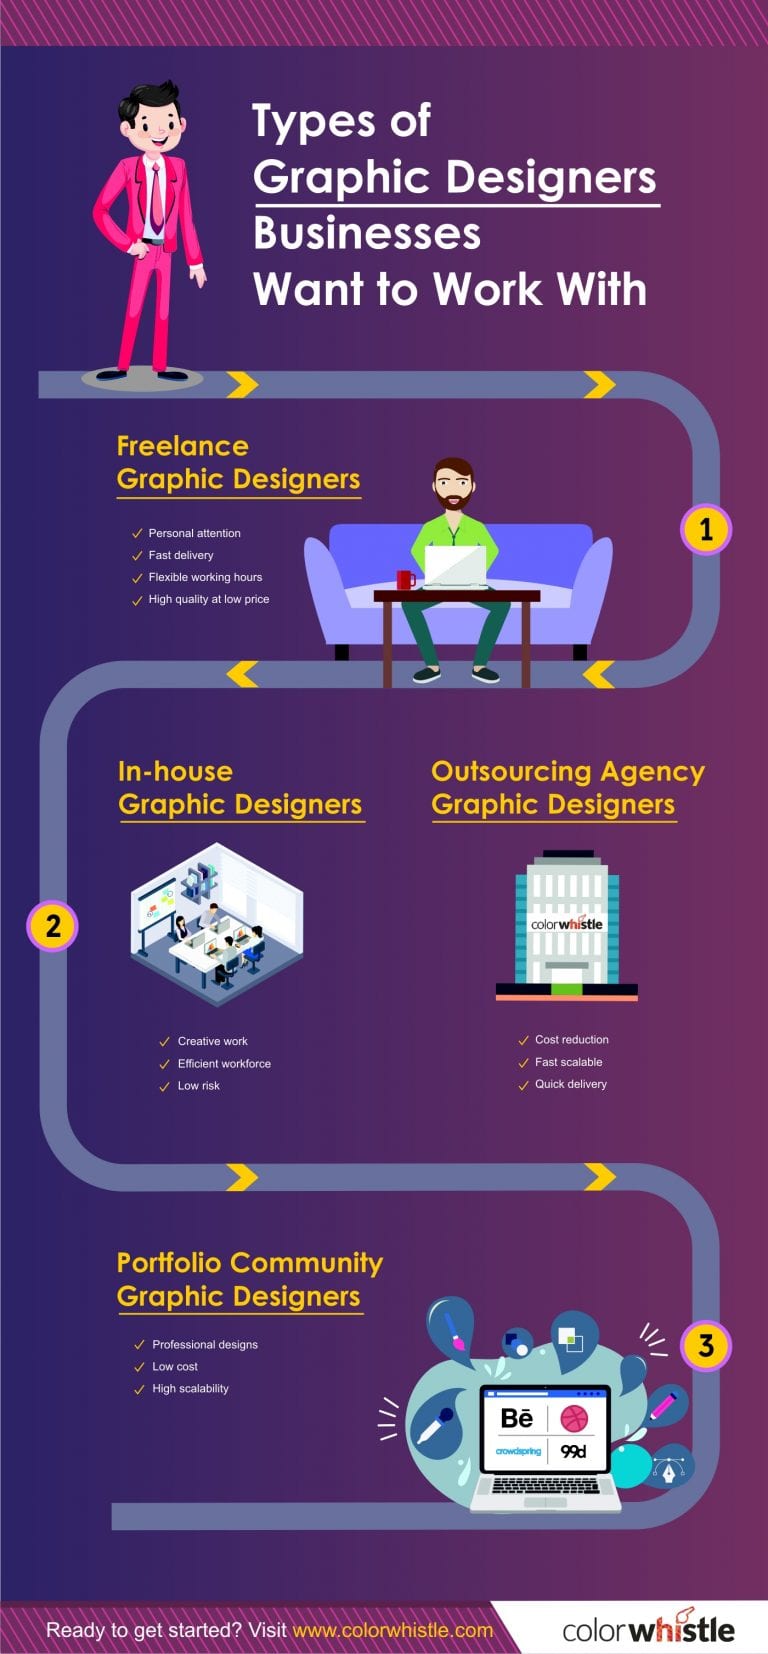 Best 4 Graphic Designers Businesses Want to Work With - ColorWhistle